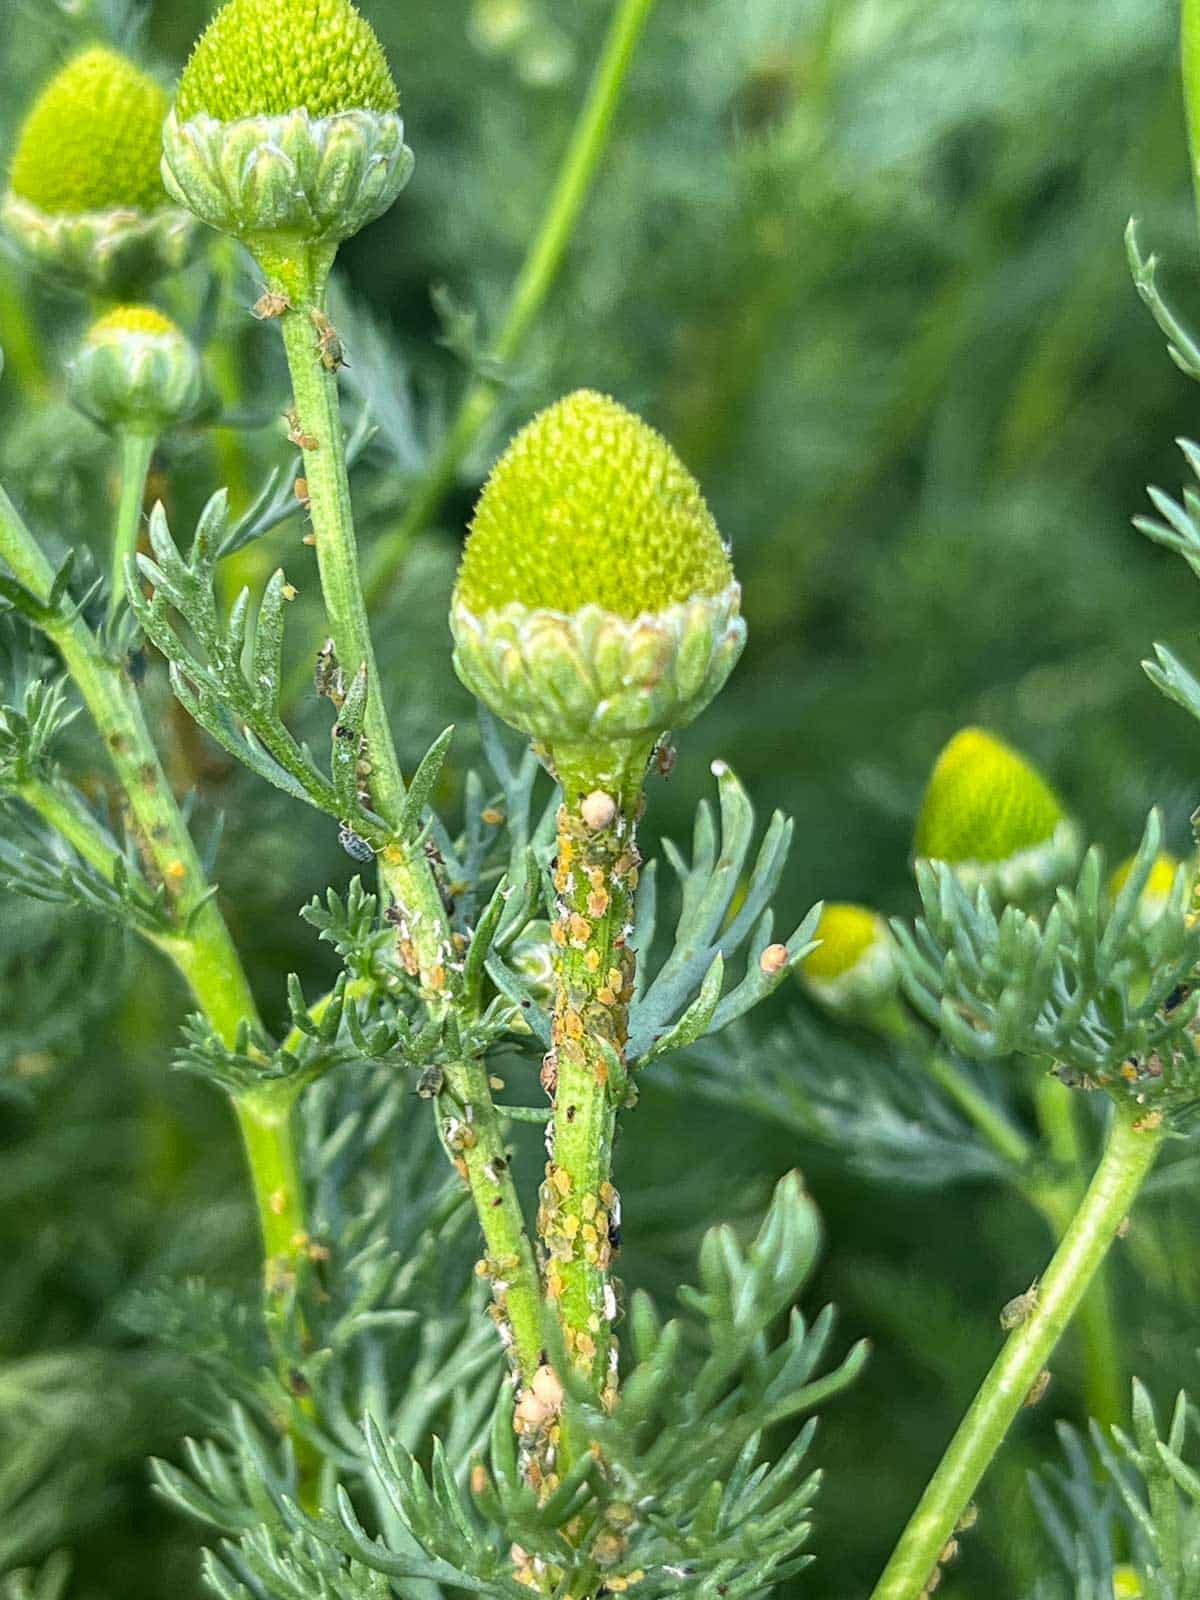 pineapple weed covered with aphids